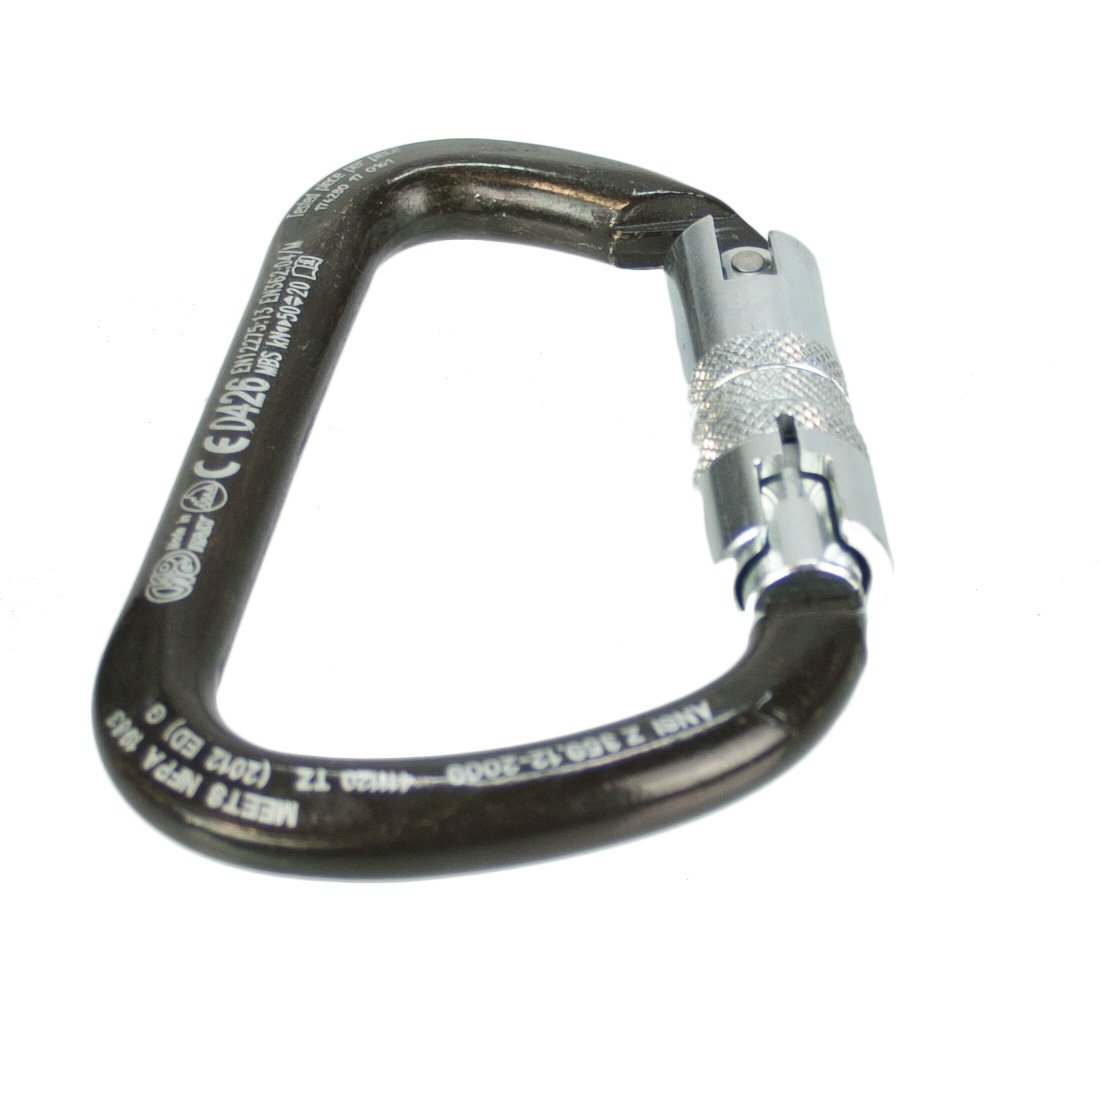 KONG ANSI Steel Carabiner Twist Lock - Extra Large - Oblique Top View